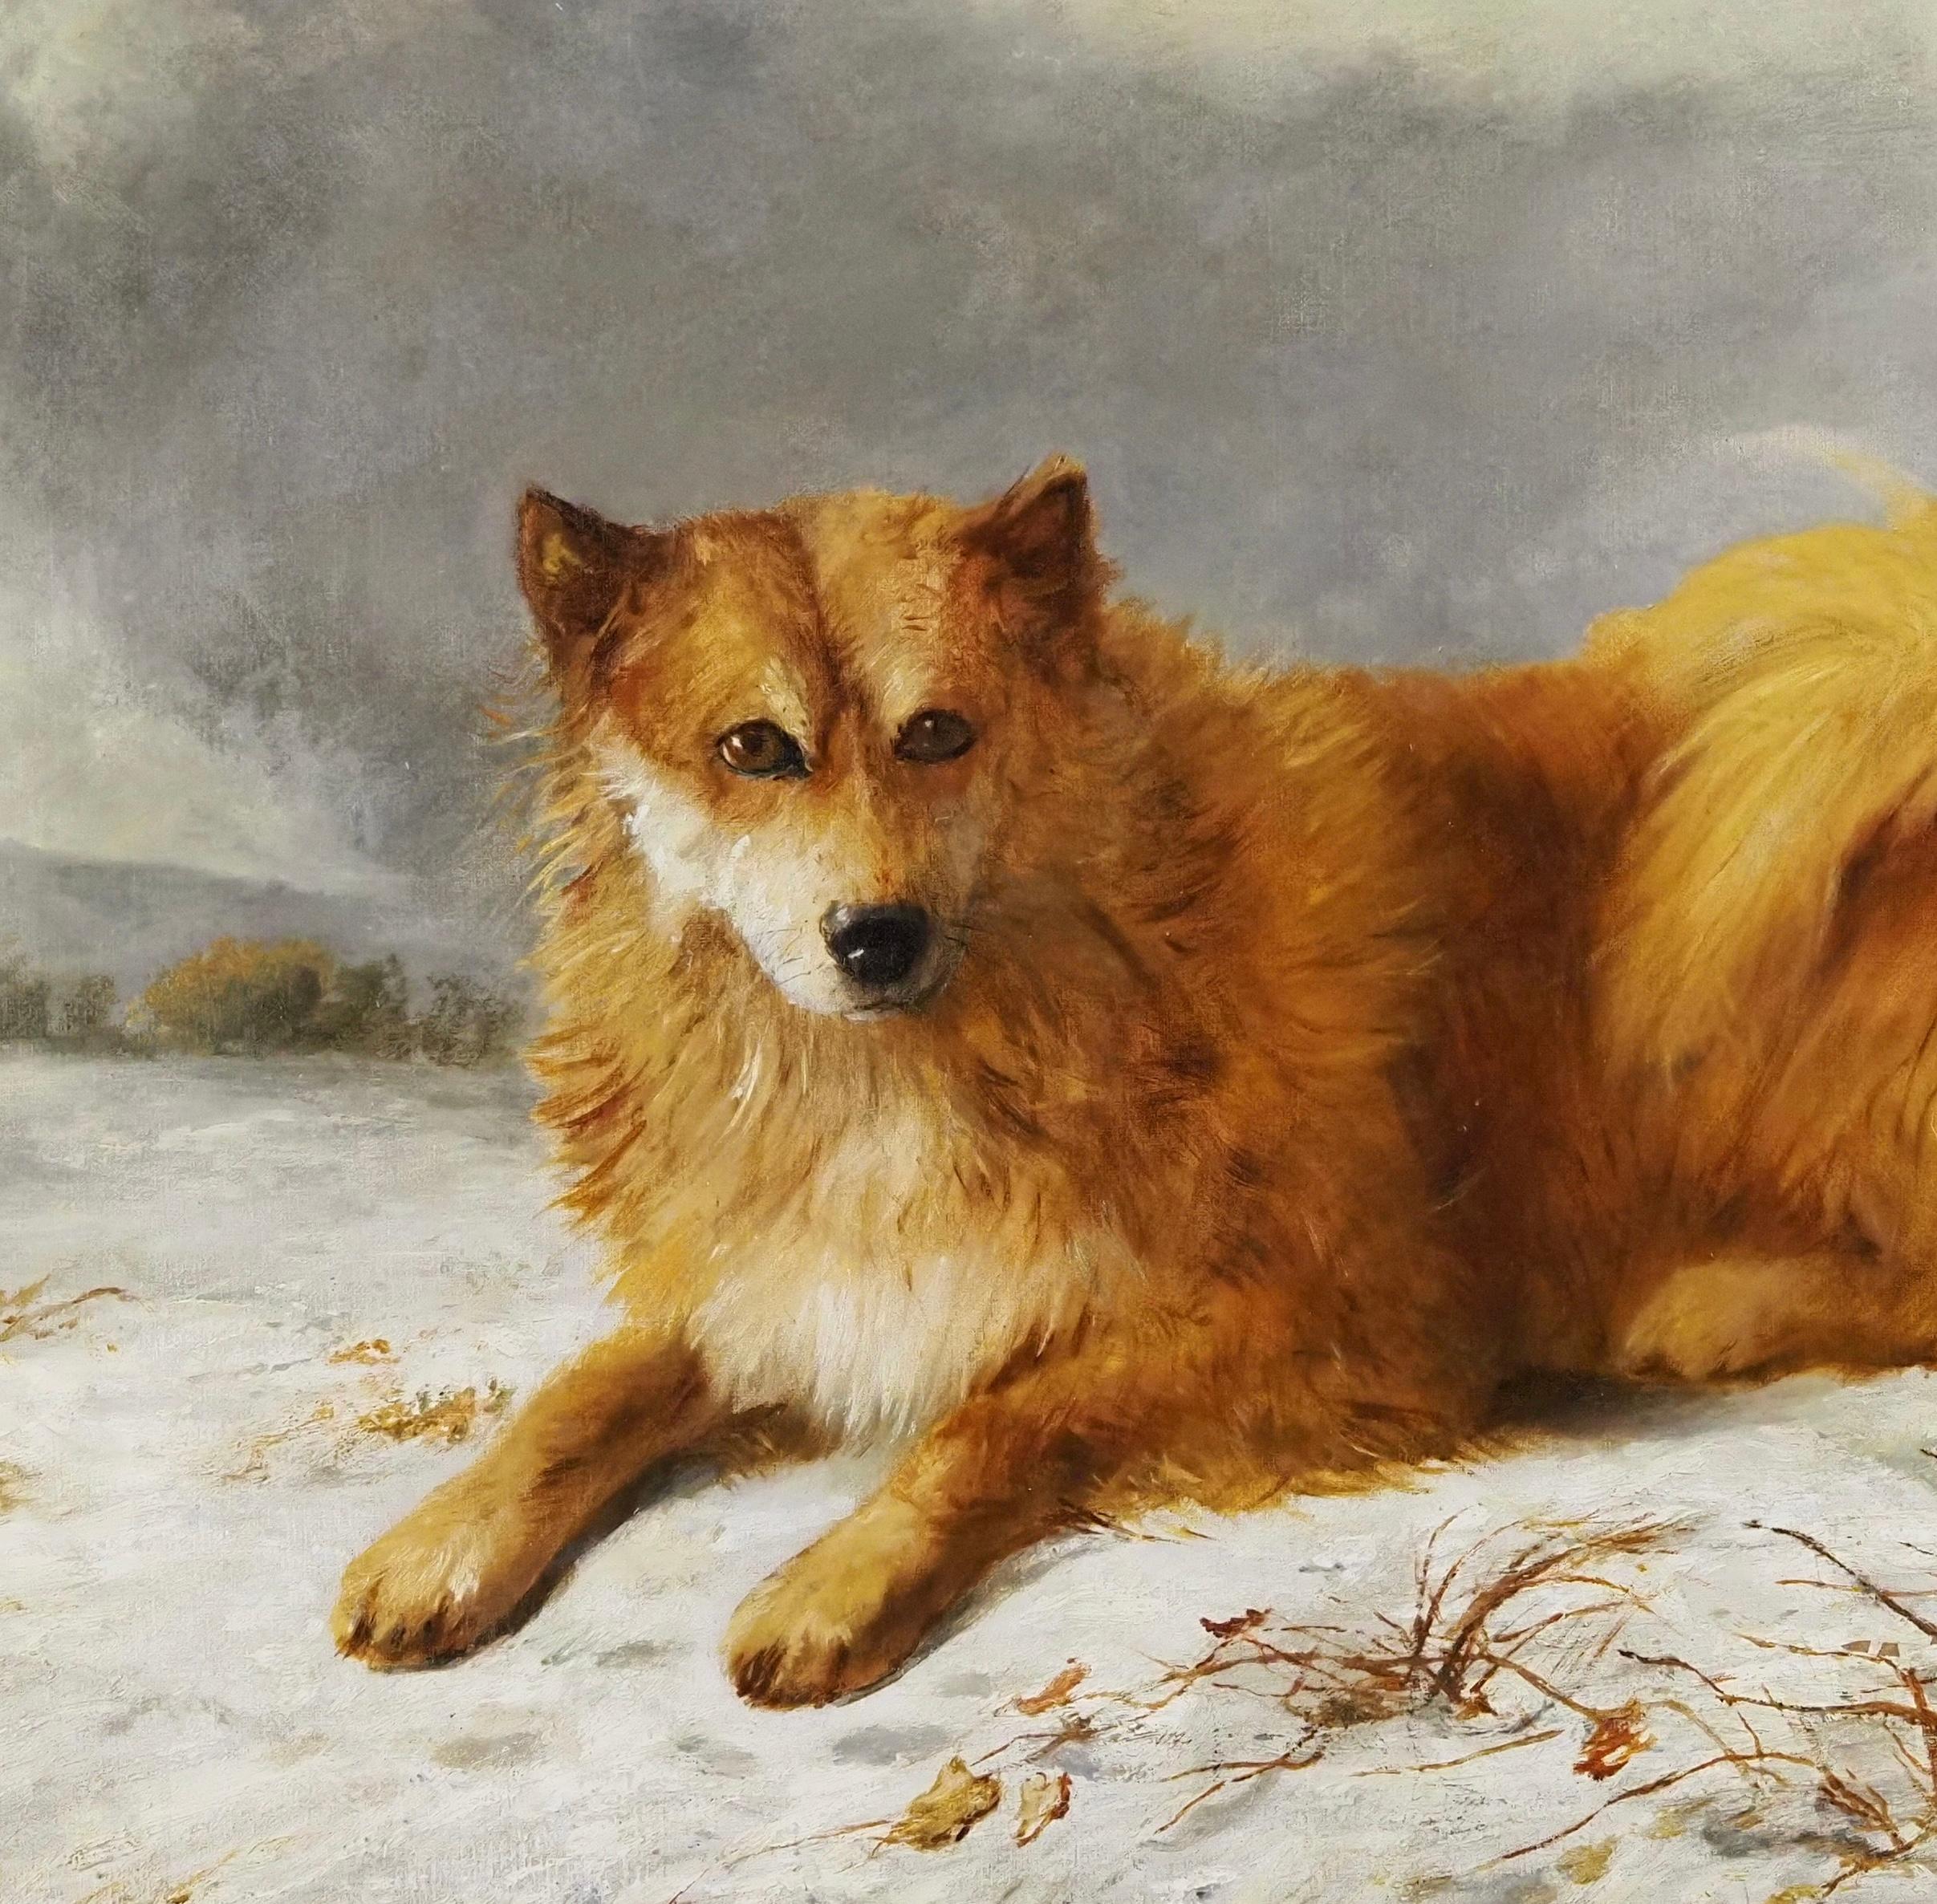 Arthur James Stark (1831-1902)
Husky in a snowy landscape
Signed 'a j Stark, 1879' lower right
Oil on canvas
Canvas size - 20 x 26 in
Framed size - 26 x 32 in

Arthur James Stark (1831-1902) was a British painter known for his serene and atmospheric